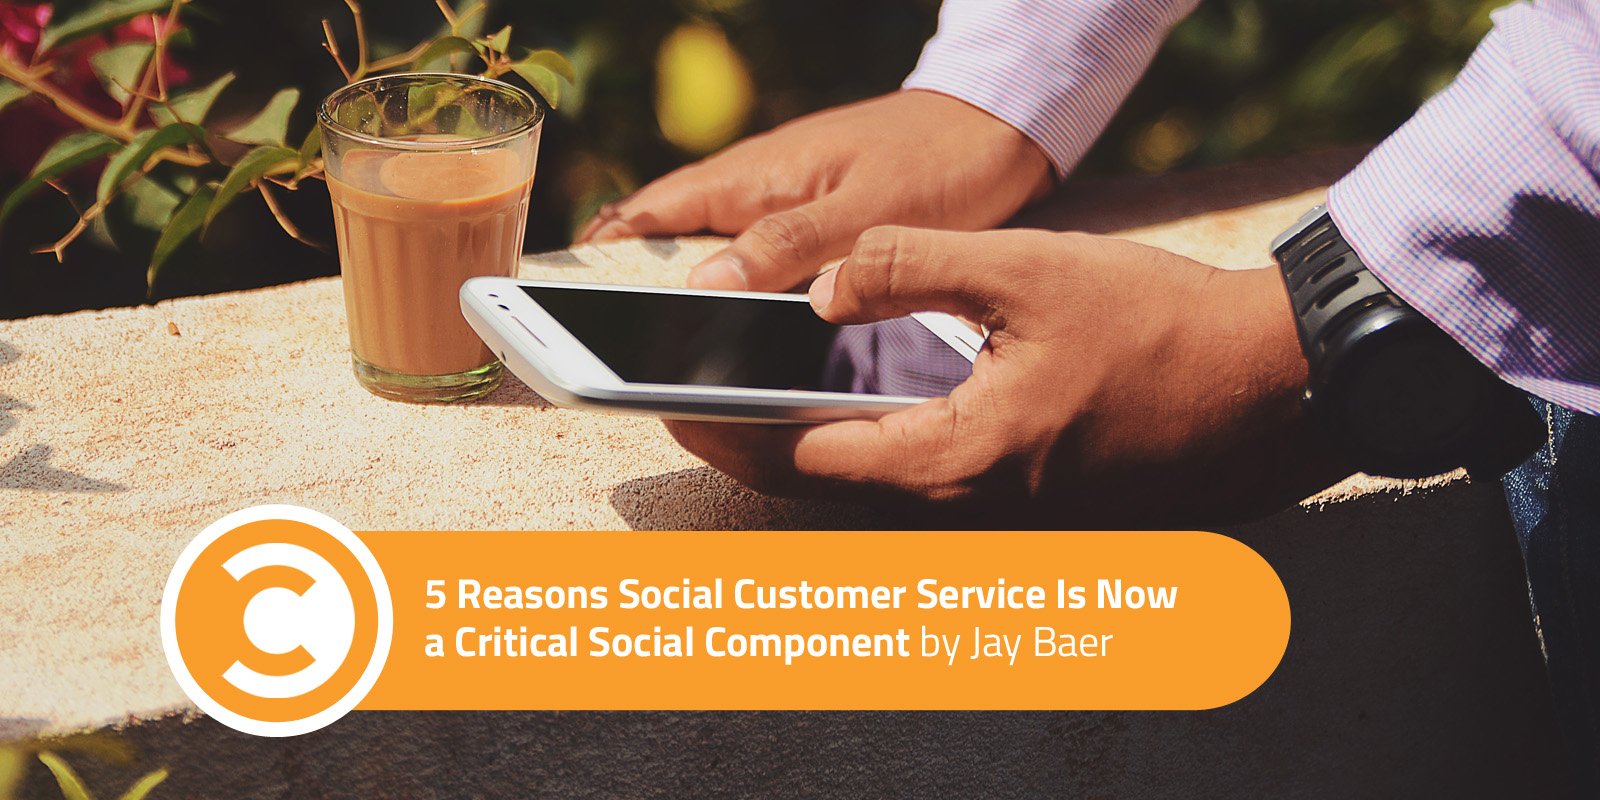 5 Reasons Social Customer Service Is Now a Critical Social Component